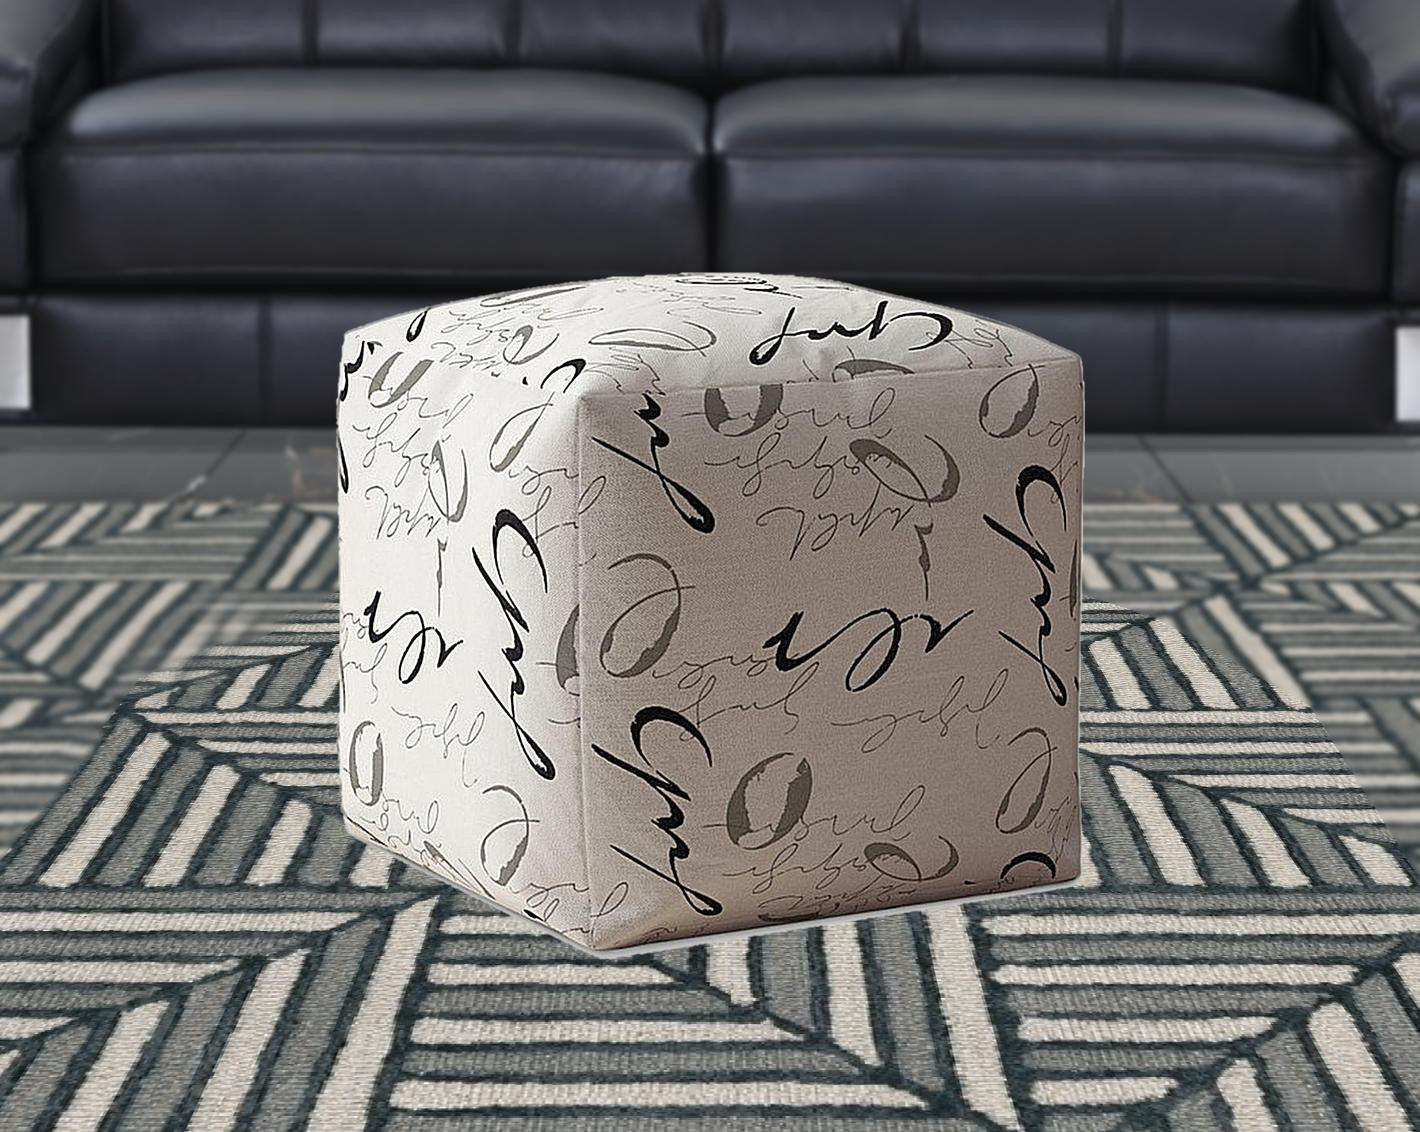 17" Black 100% Polyester Abstract Pouf Ottoman